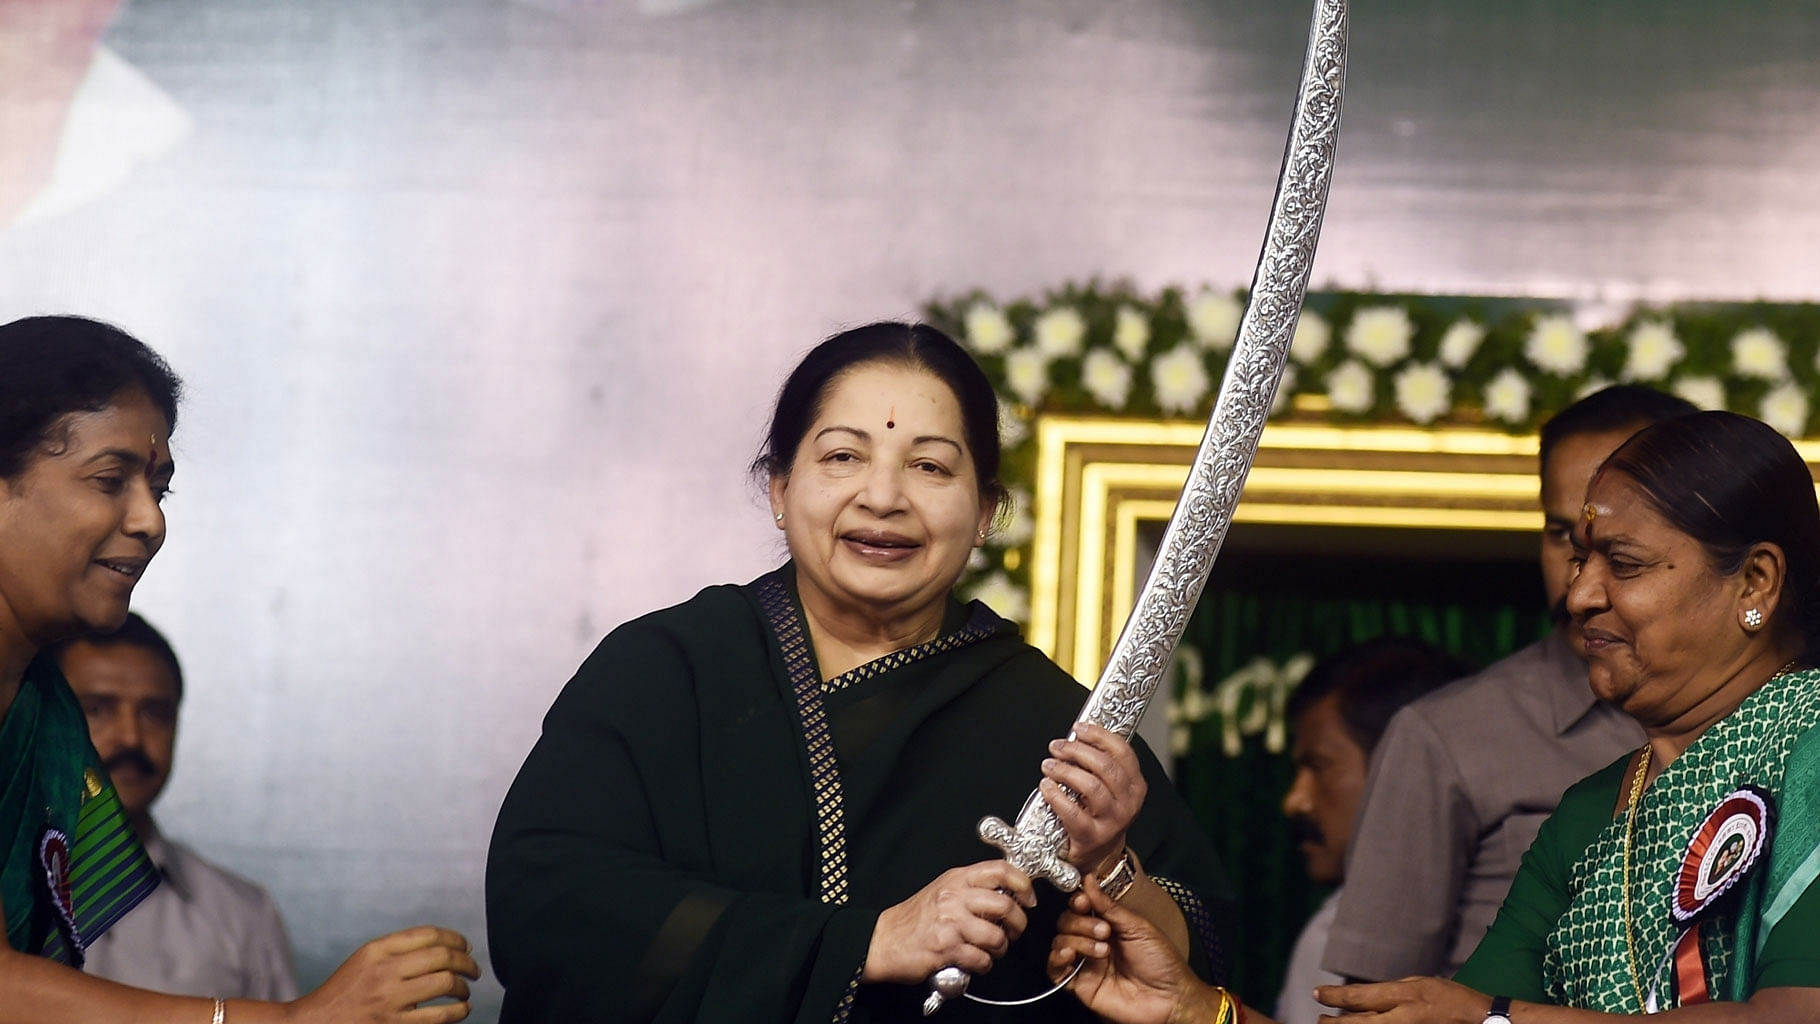  Tamil Nadu Chief Minister and AIADMK chief J Jayalalithaa during a party meeting in Chennai. (Photo courtesy: IANS)